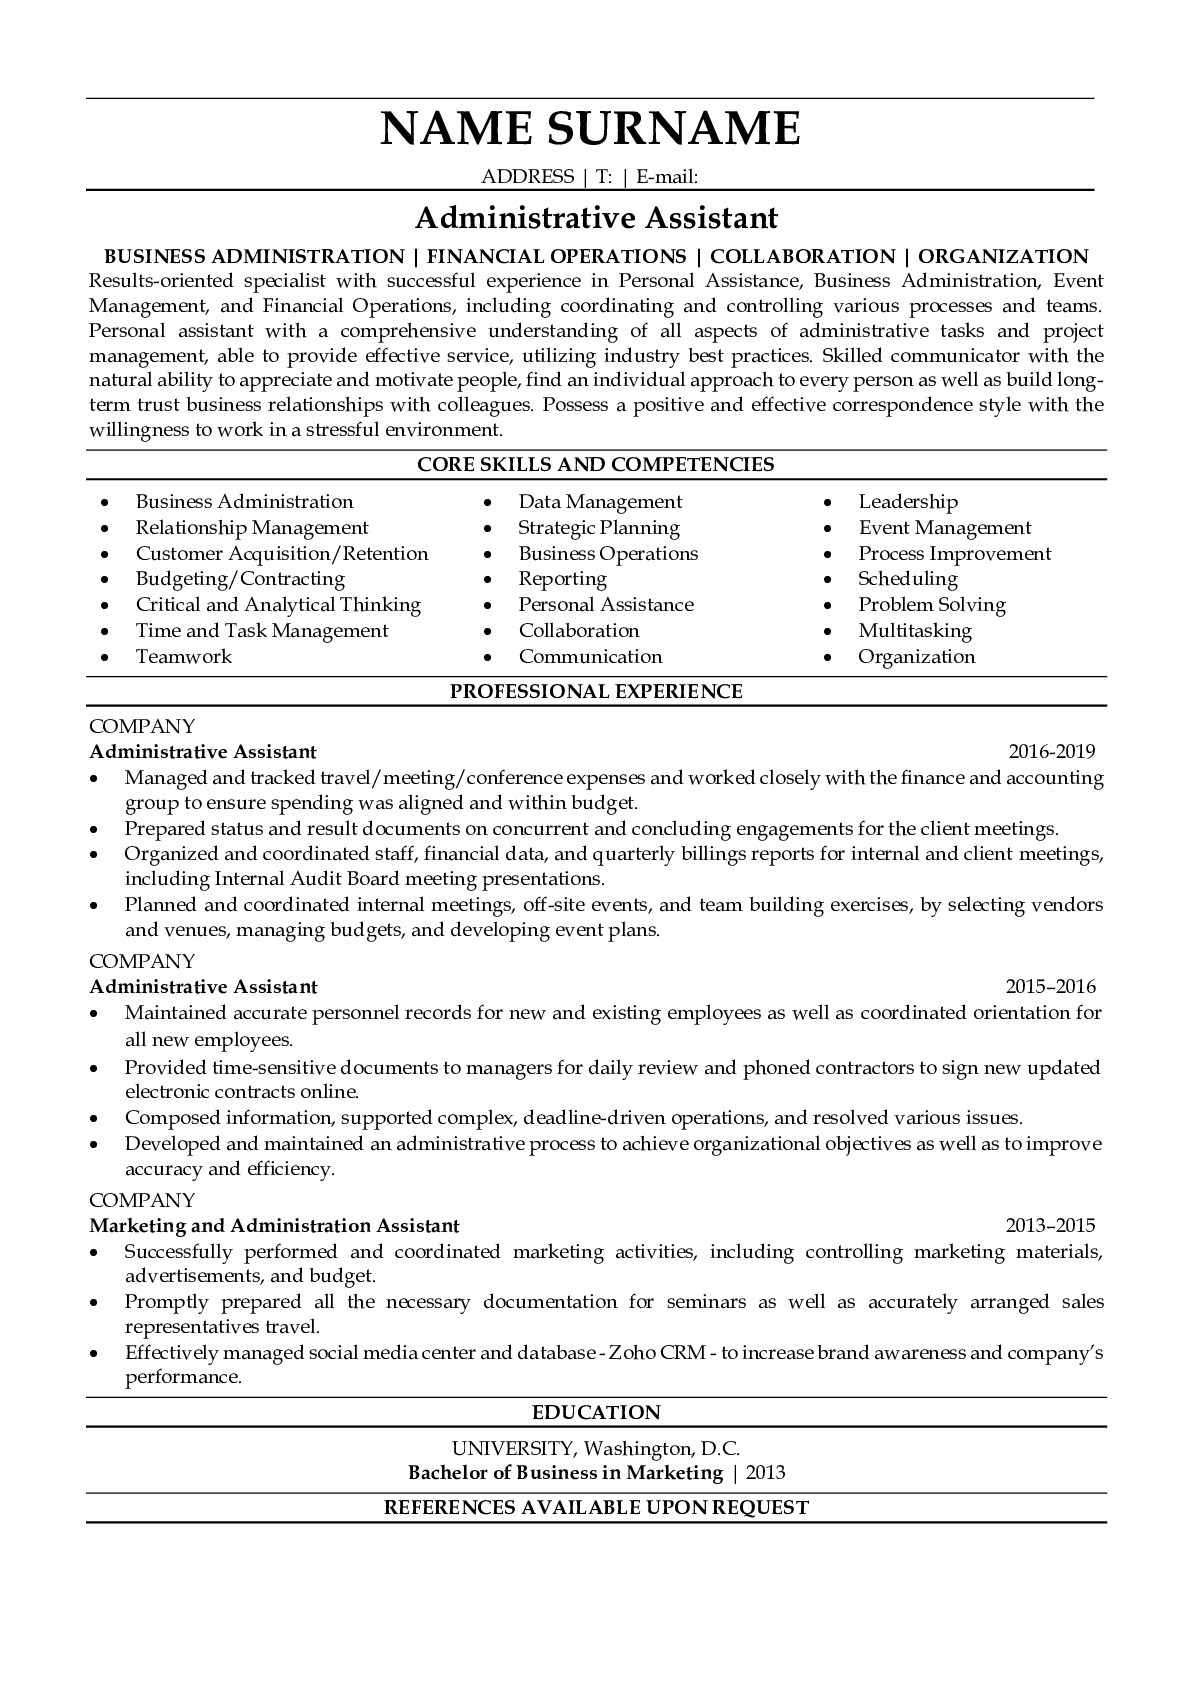 Resume Example for Administrative Assistant